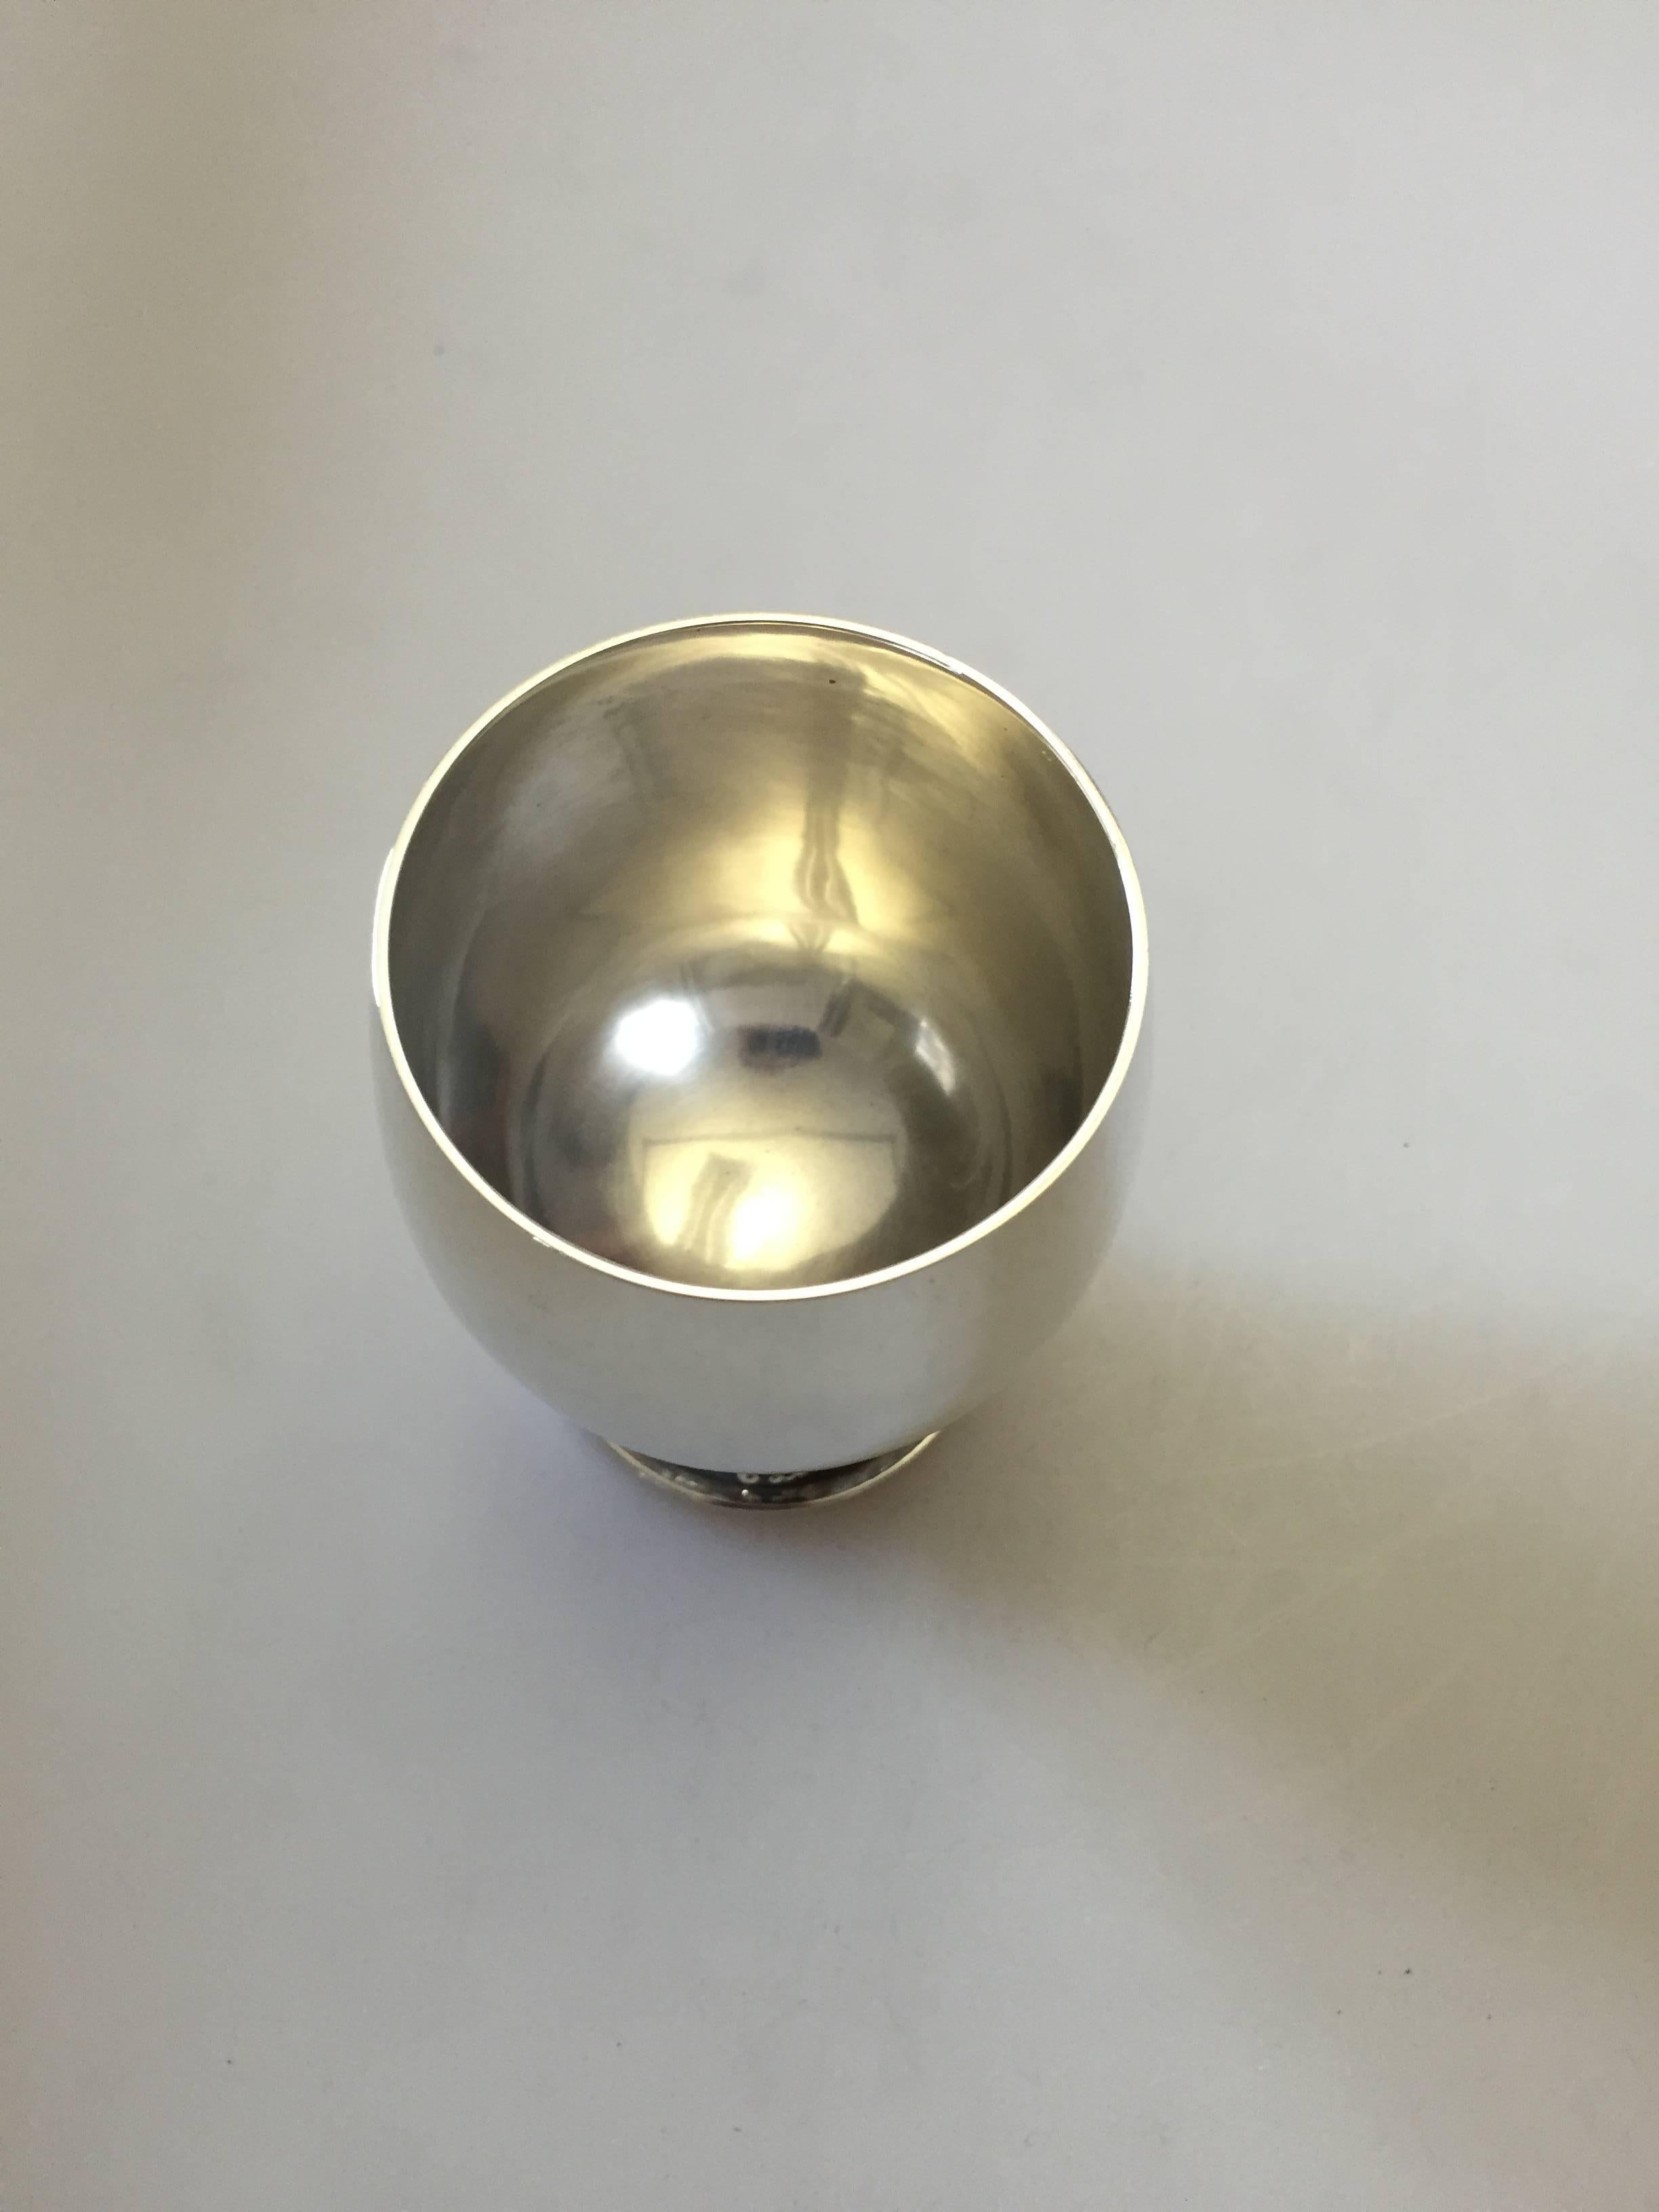 Georg Jensen sterling silver grape cup no. 296A. Measures: 10 cm x 7 cm. The cup is in good conduction all around.

Georg Jensen (1866-1935) opened his small silver atelier in Copenhagen, Denmark in 1904. By 1935 the year of his death, he had